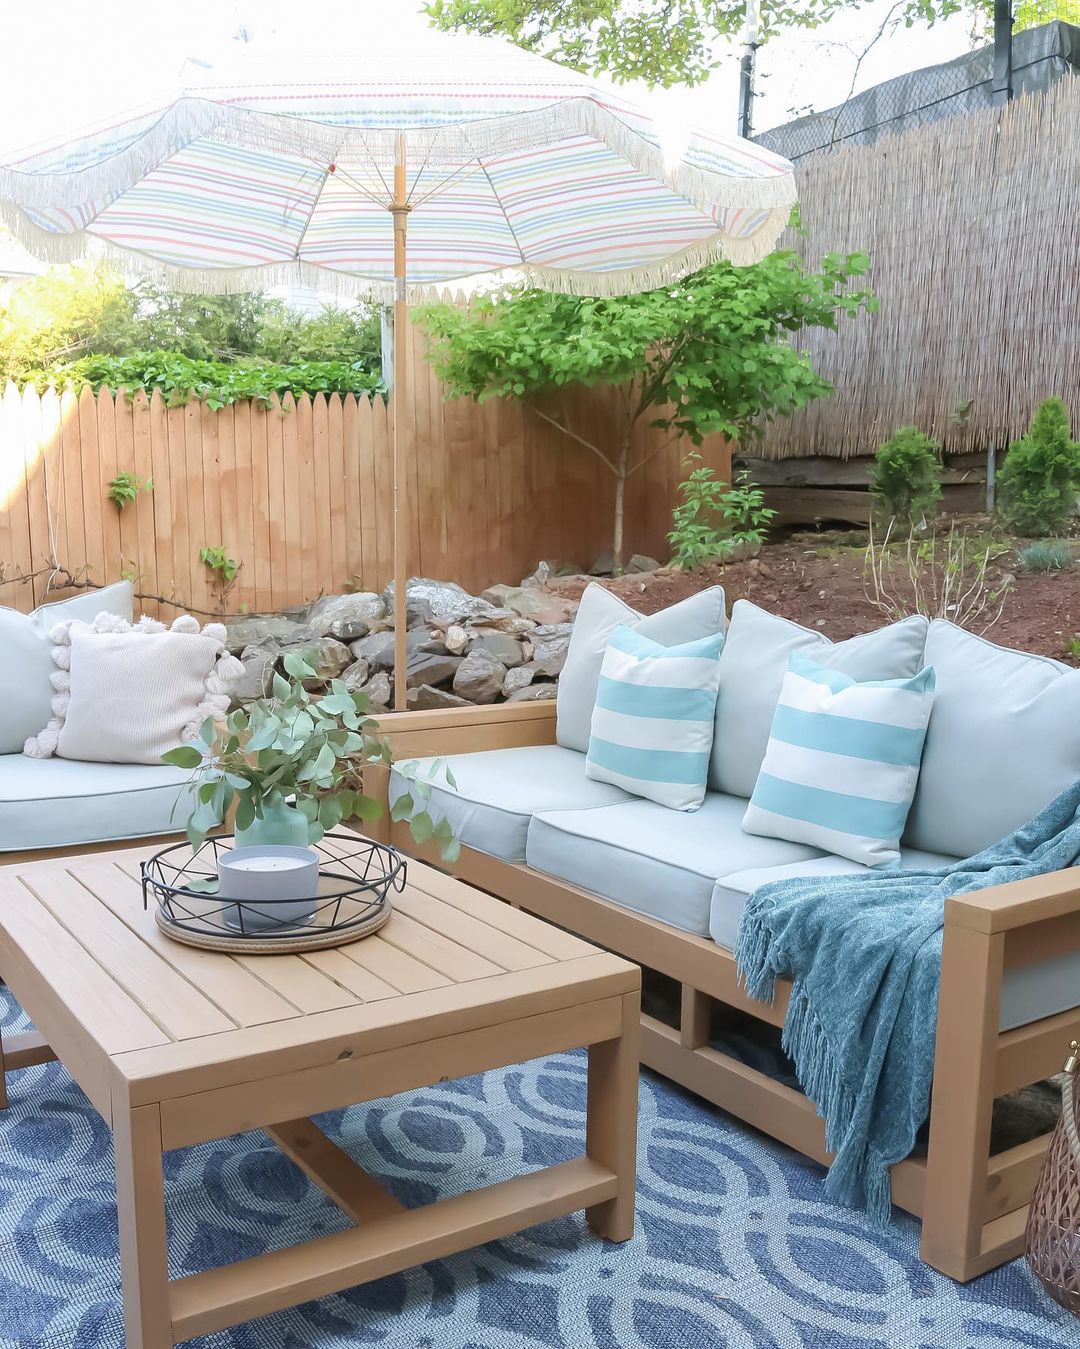 21 DIY Outdoor Furniture Ideas for Your Backyard | Extra Space Storage